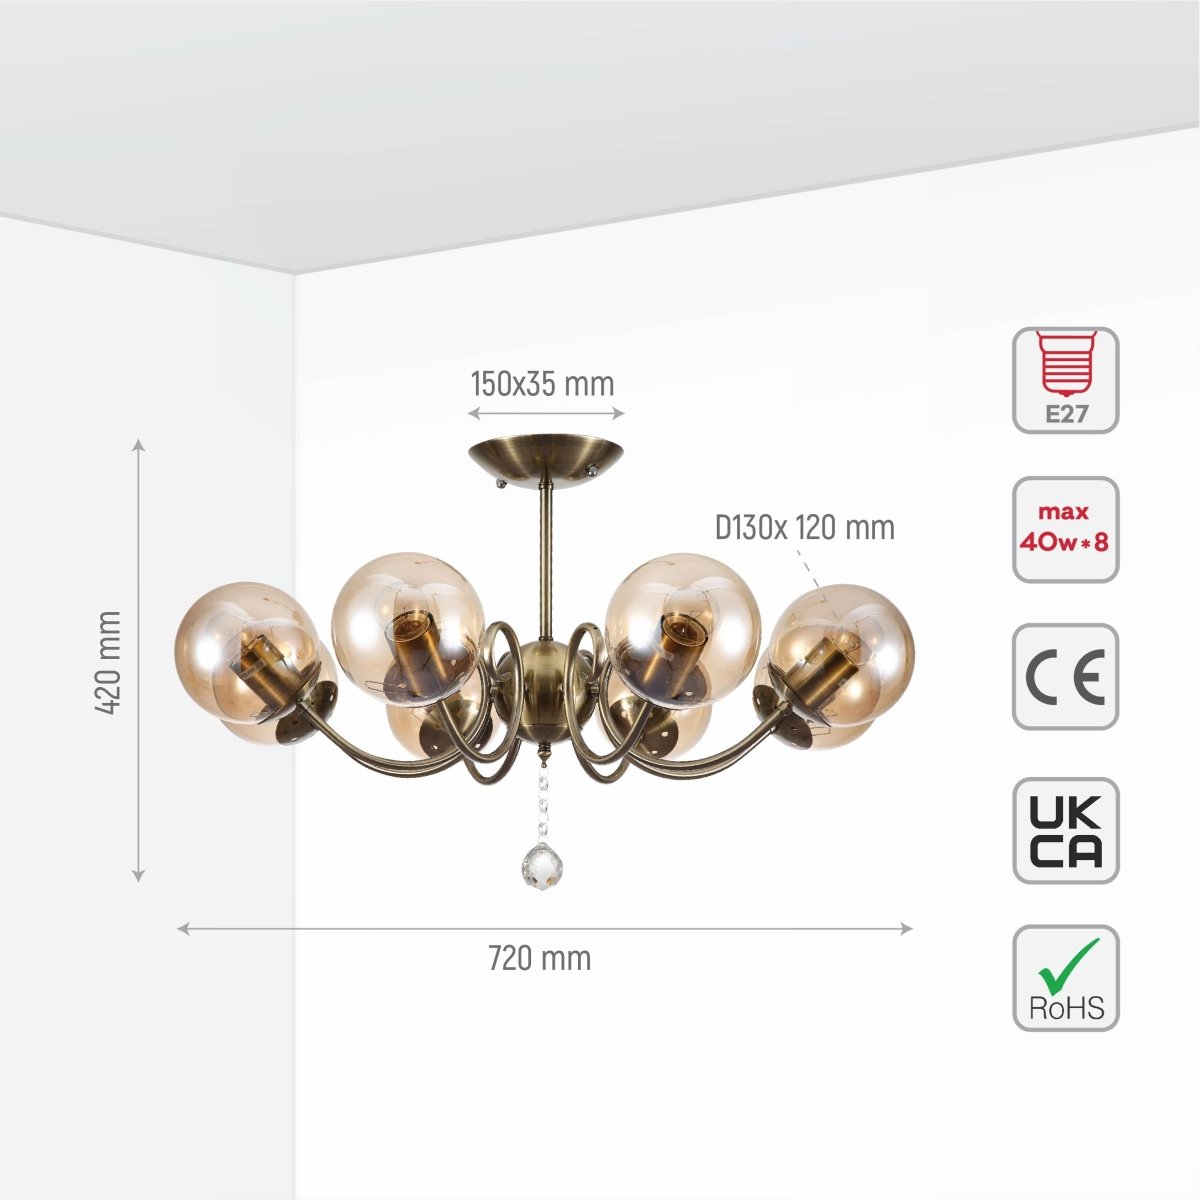 Size and specs of Amber Globe Glass Antique Brass Metal Body Vintage Retro Crystal Ceiling Light with E27 Fittings | TEKLED 159-17776